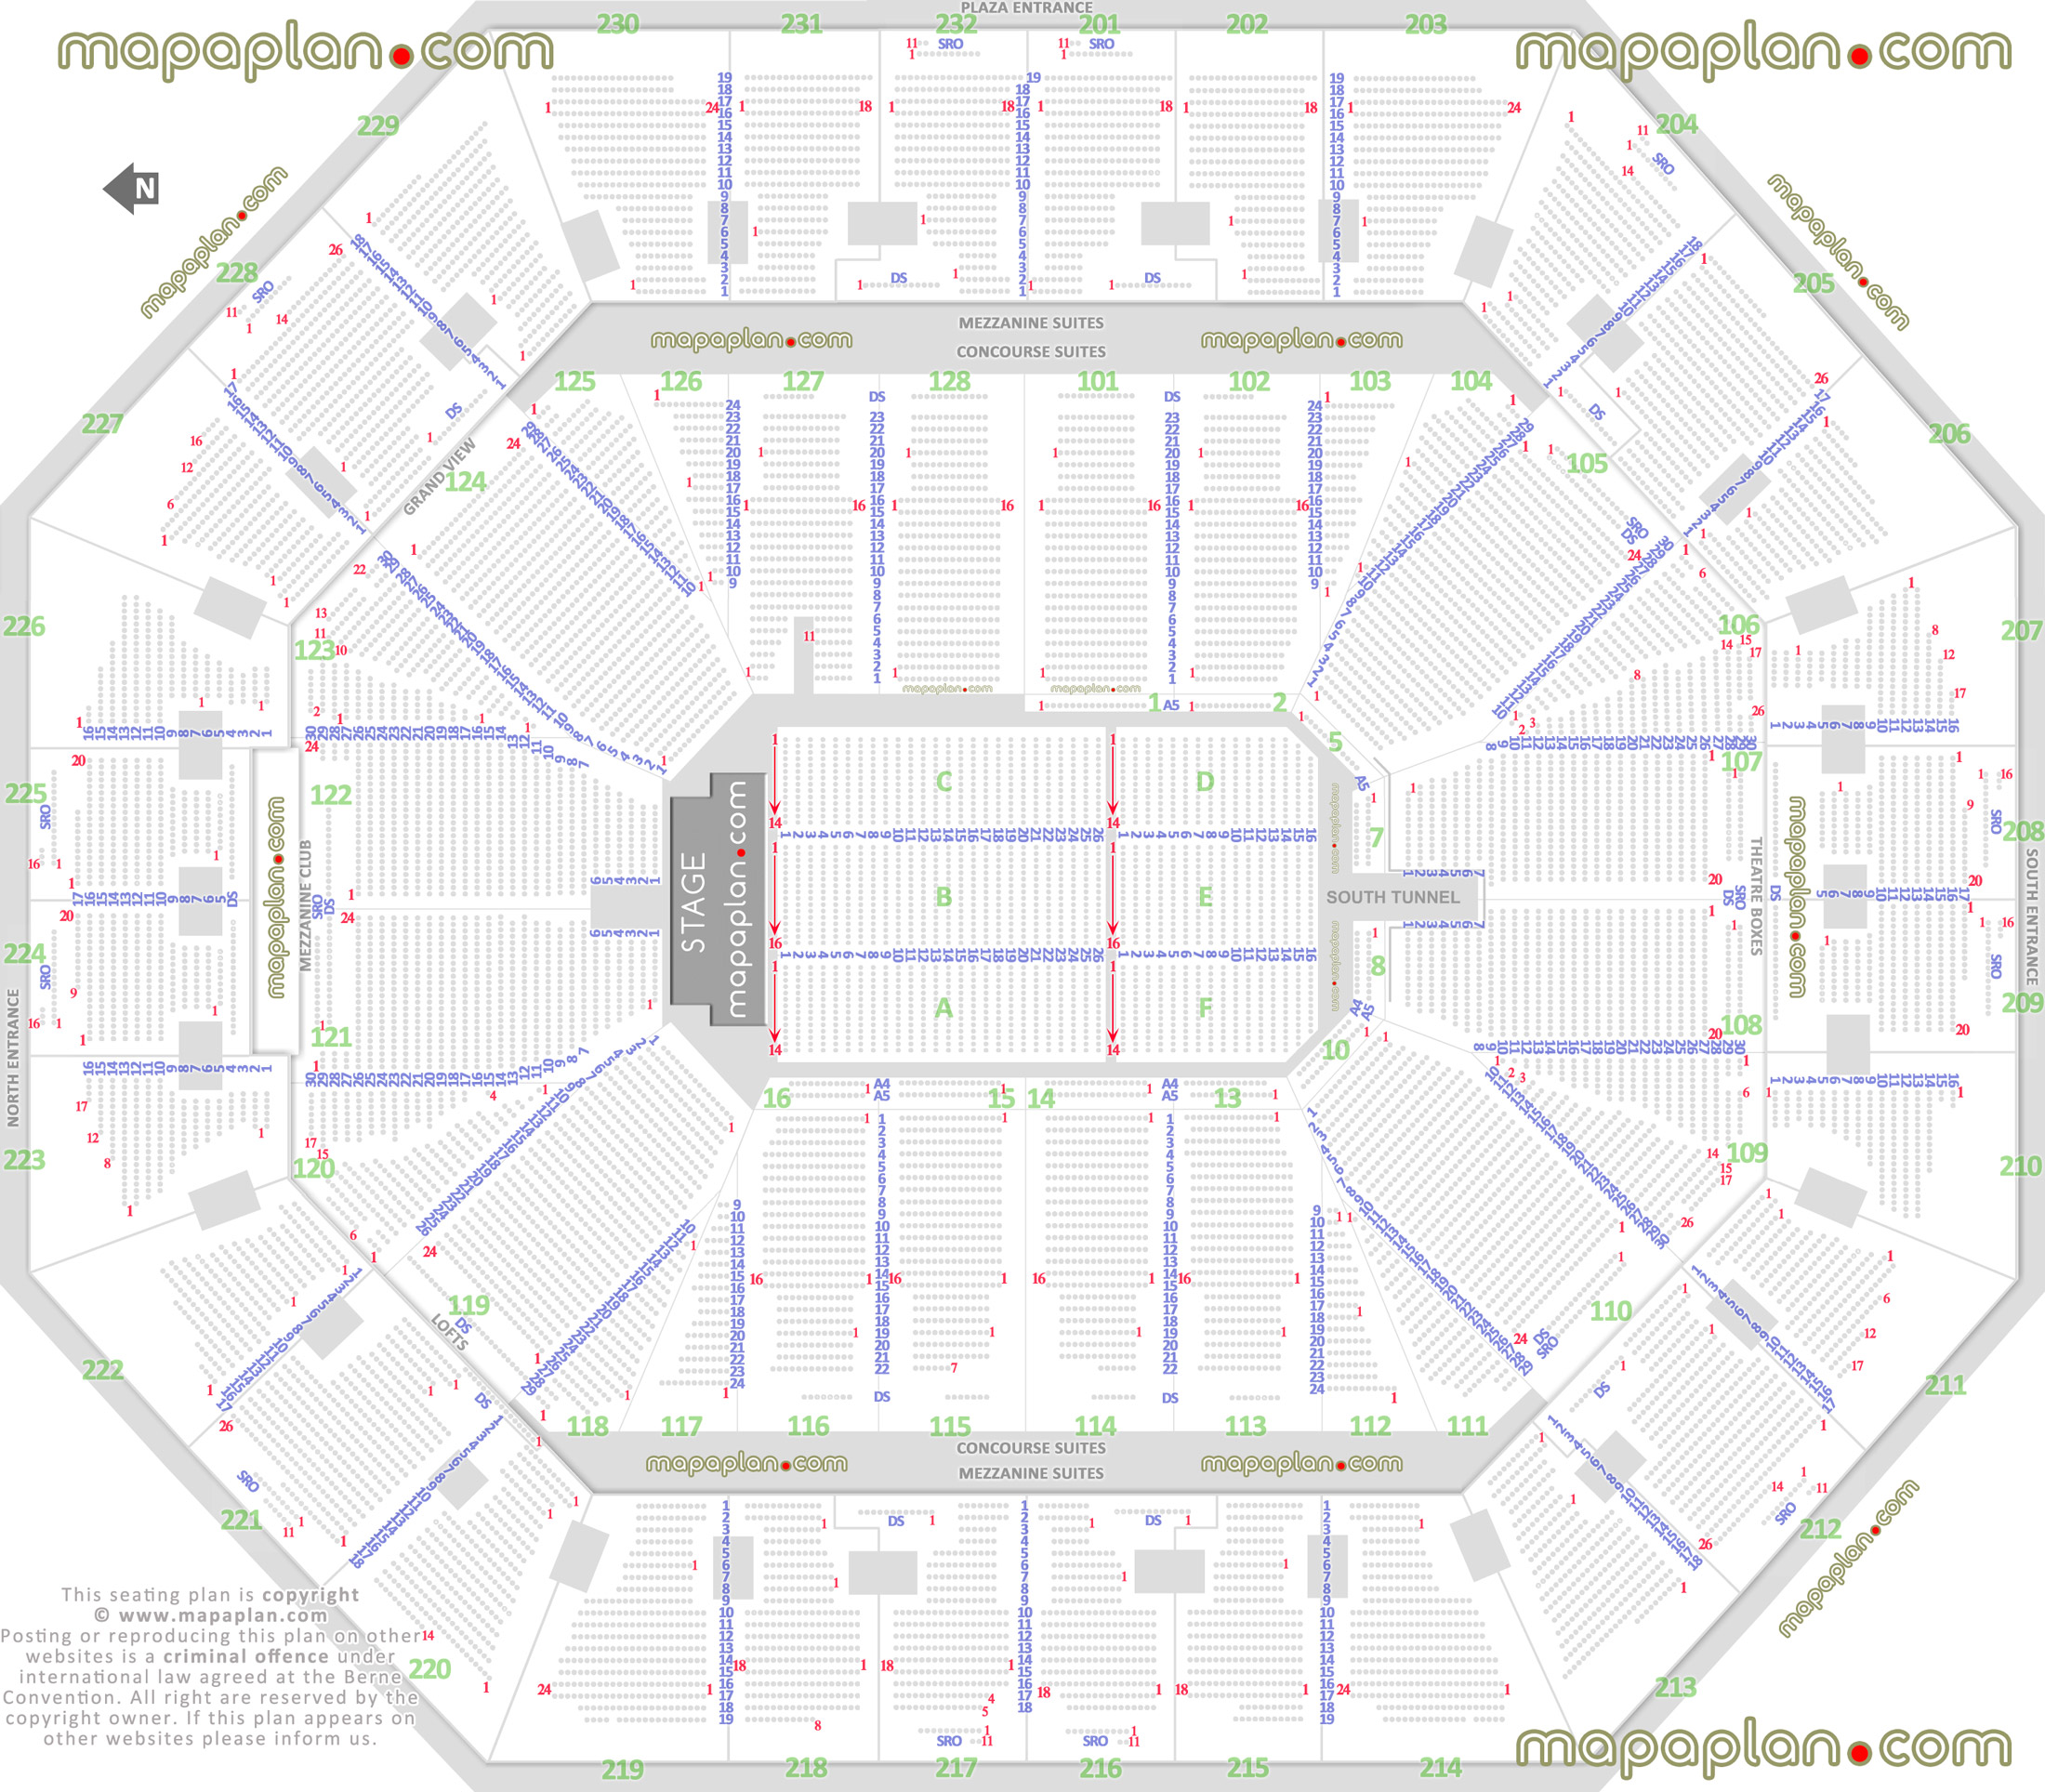 detailed seat row numbers end stage concert sections floor plan map arena lower upper level layout Oakland Oracle Arena seating chart